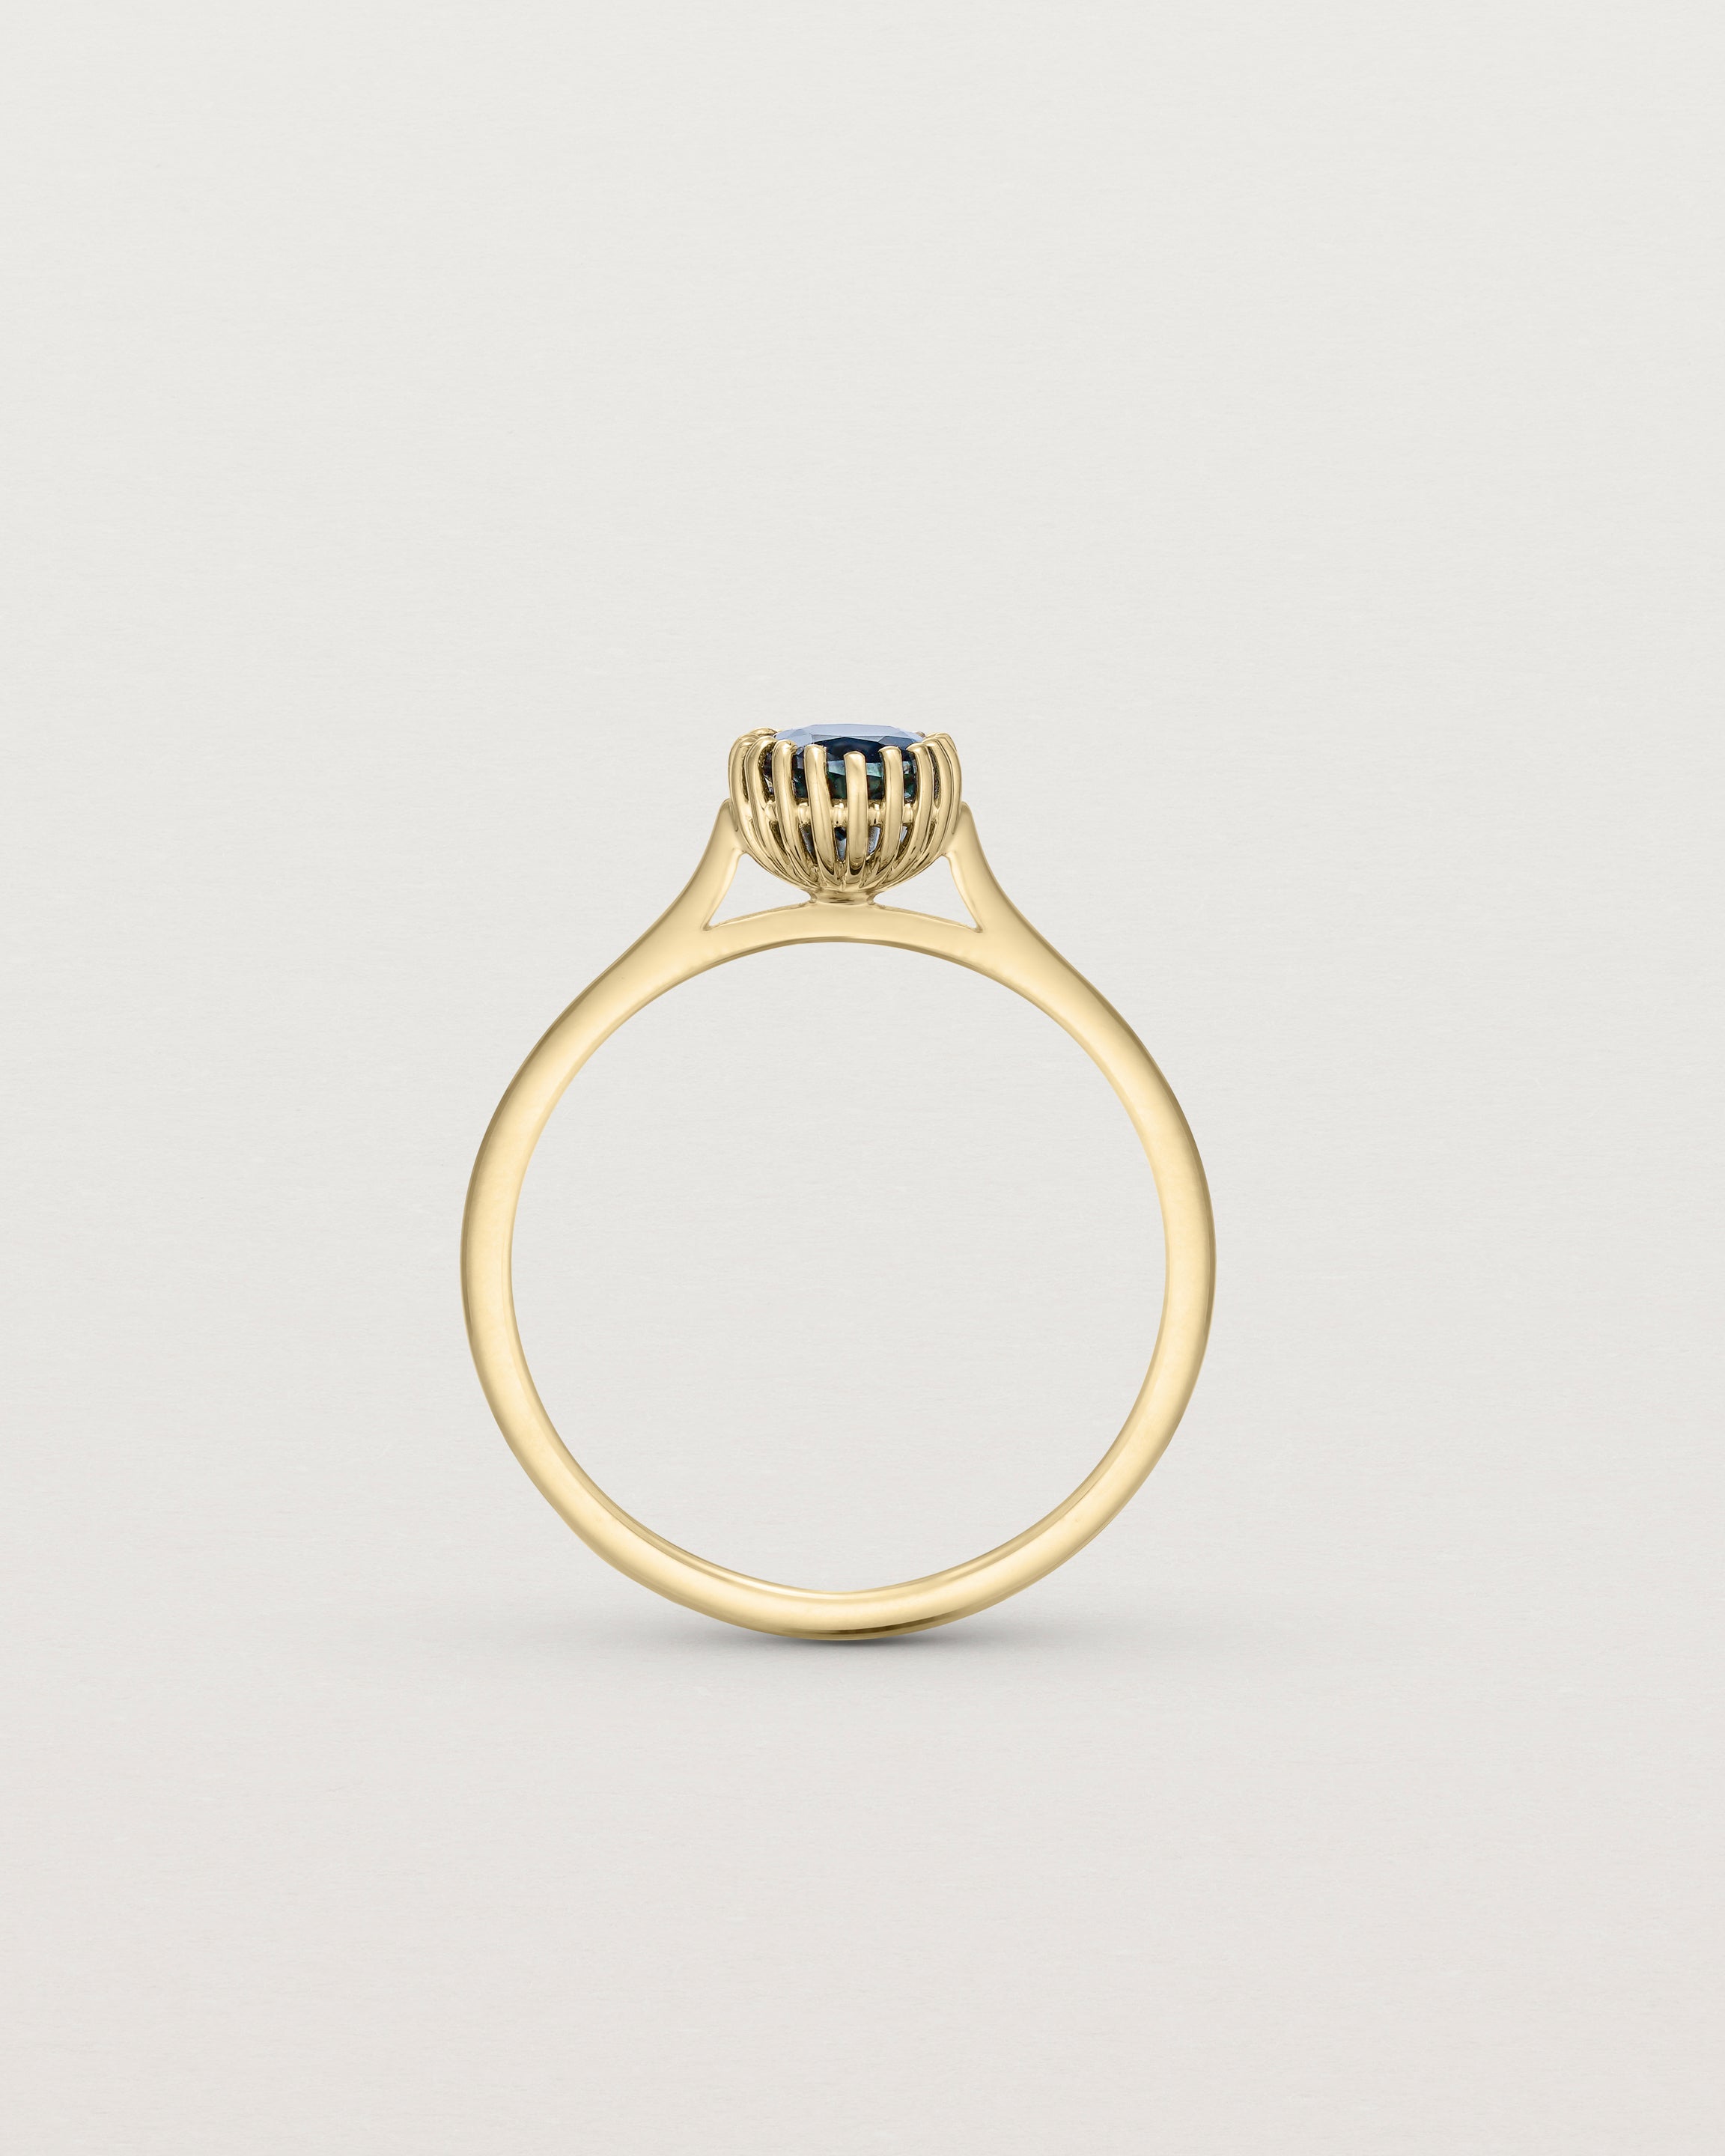 Standing view of the Meroë Oval Solitaire | Australian Sapphire in yellow gold.